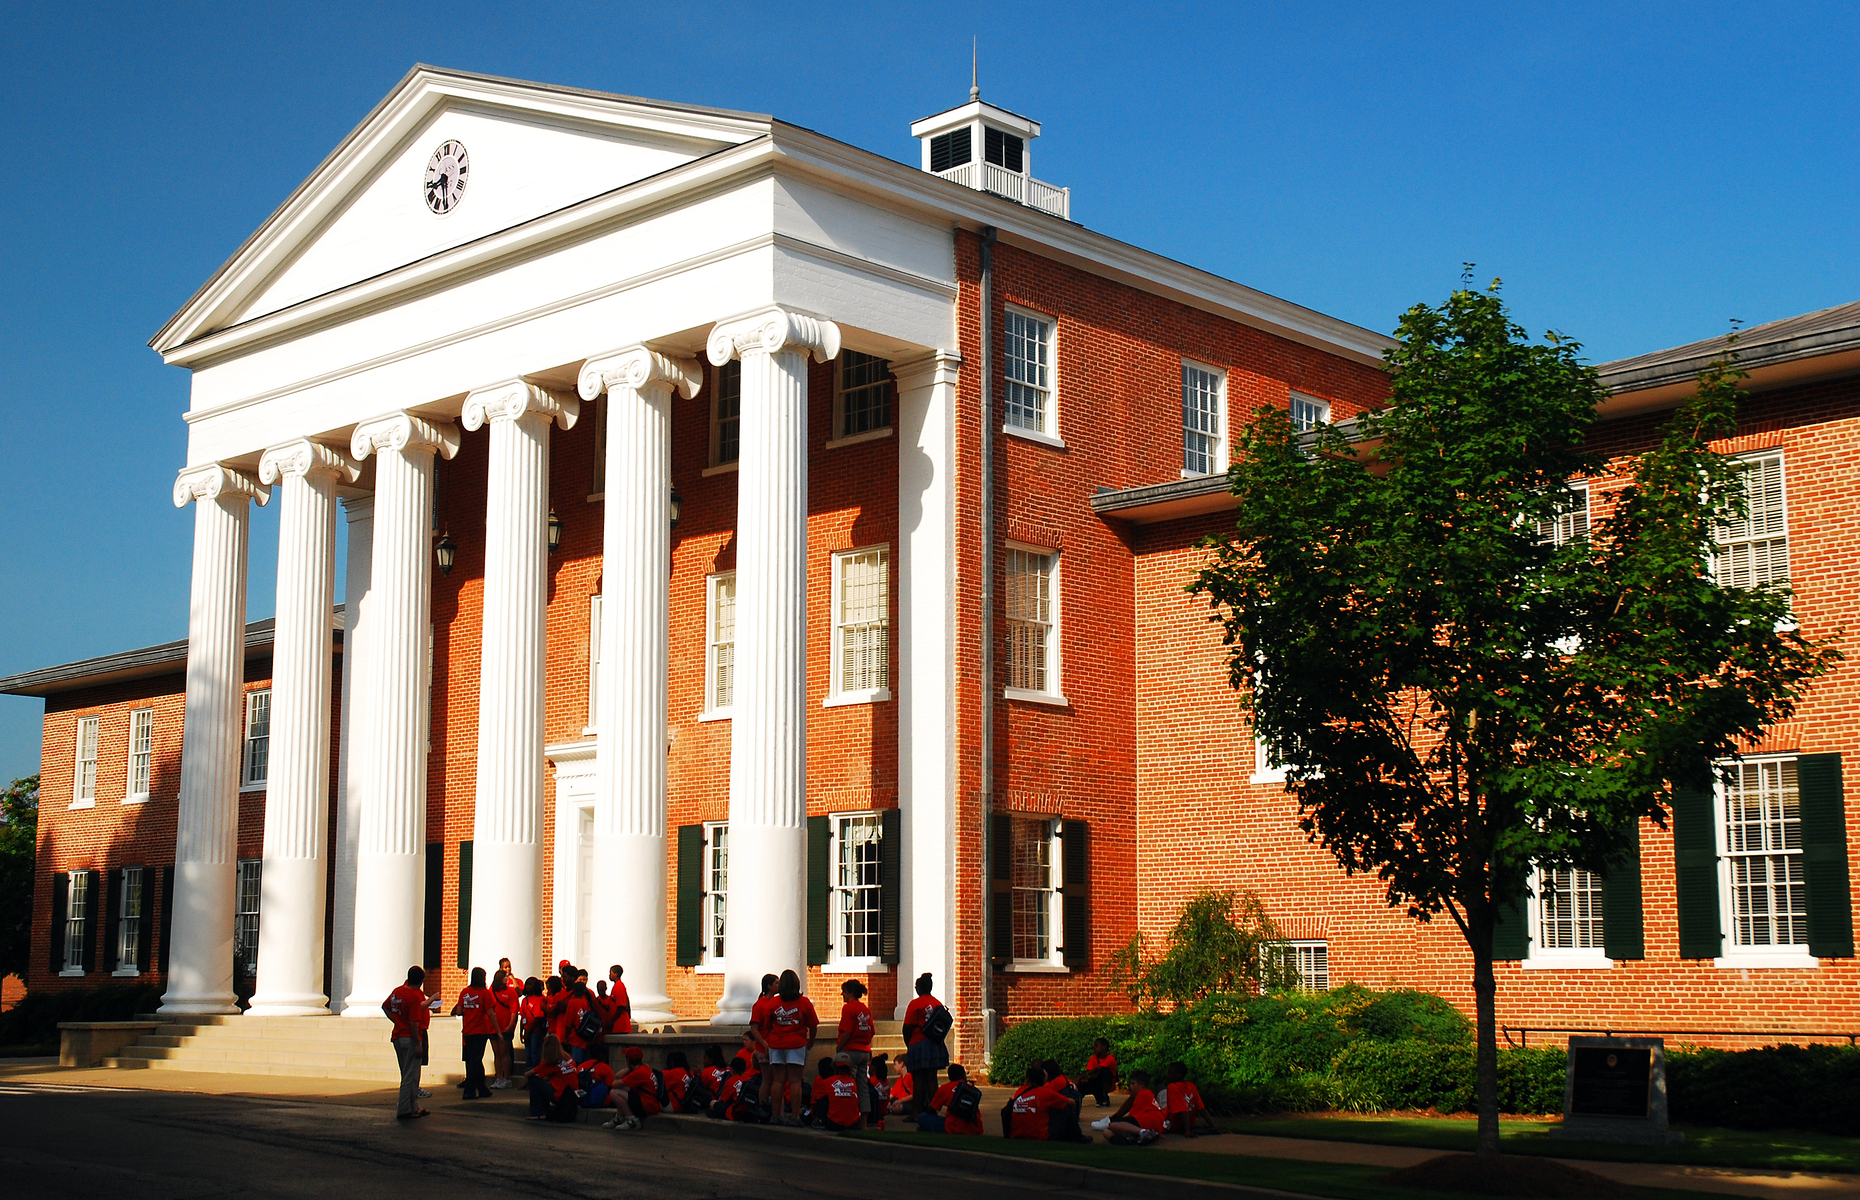 <p>The <a href="https://olemiss.edu/" rel="noreferrer noopener">University of Mississippi</a>’s campus in Oxford is a true beauty, with elm, oak, and magnolia trees surrounding its stately buildings, including the Greek Revival–style Lyceum, built in 1848.</p>